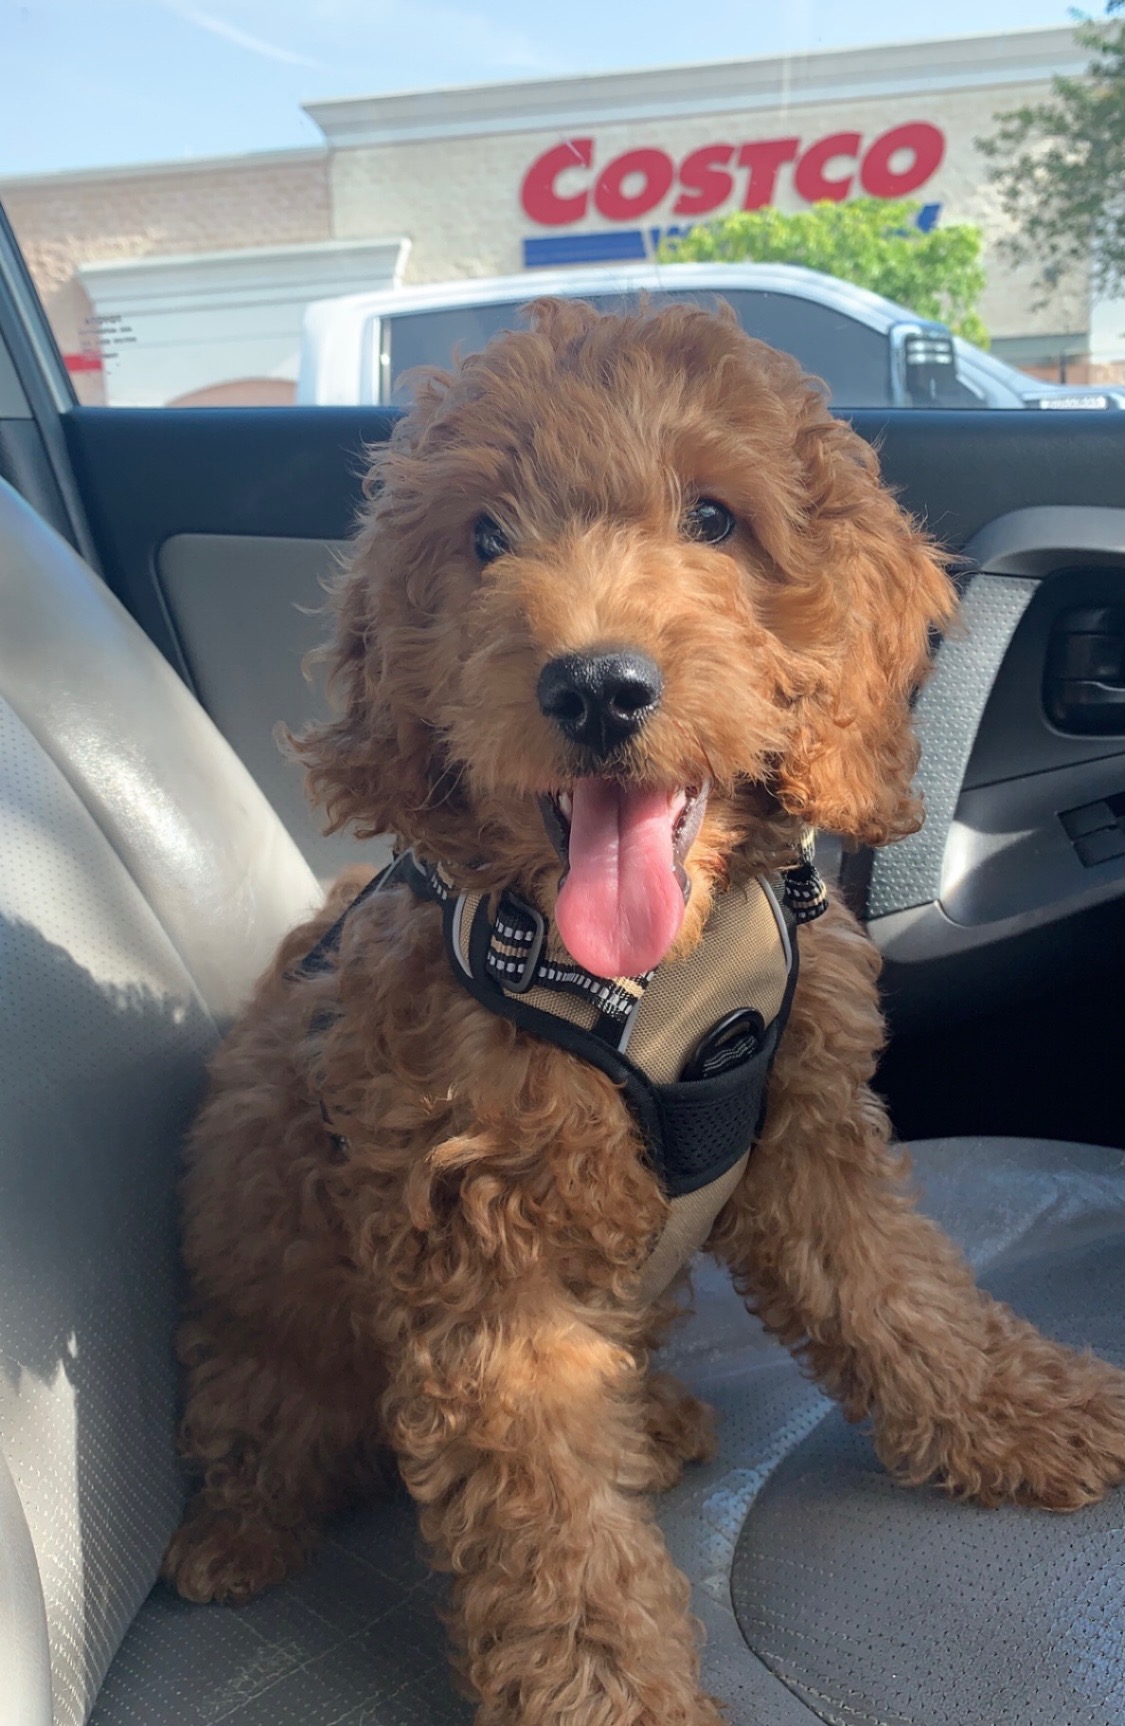 Golden Doodle puppy smiling sitting in car infront of Costco.